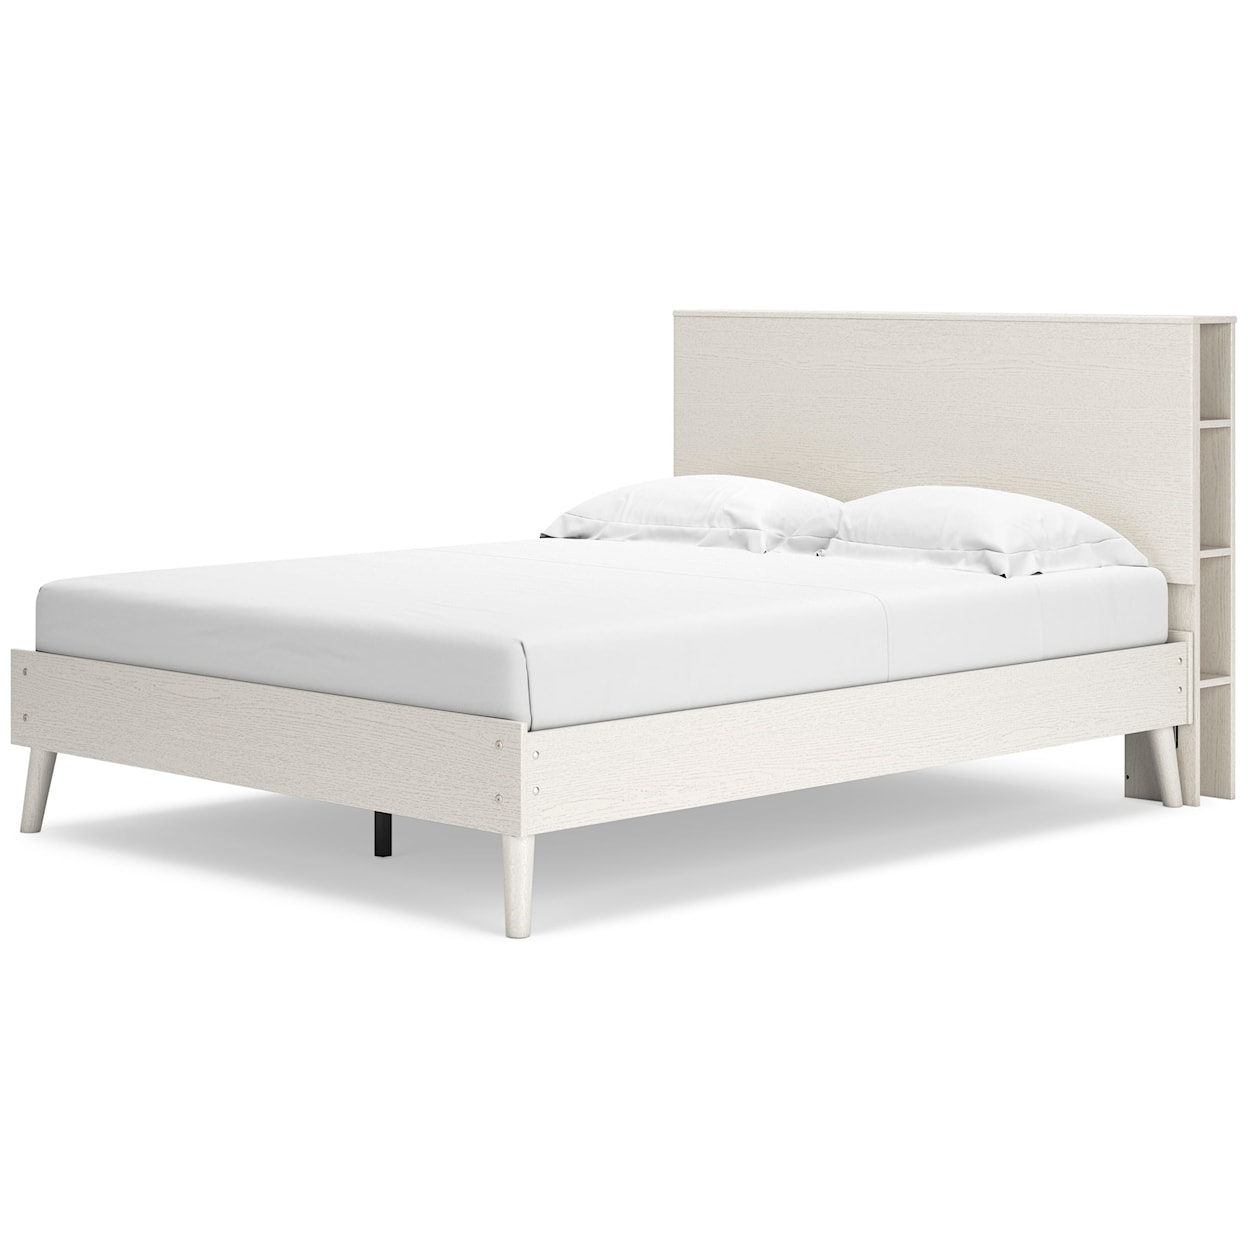 Michael Alan Select Aprilyn Queen Bookcase Bed